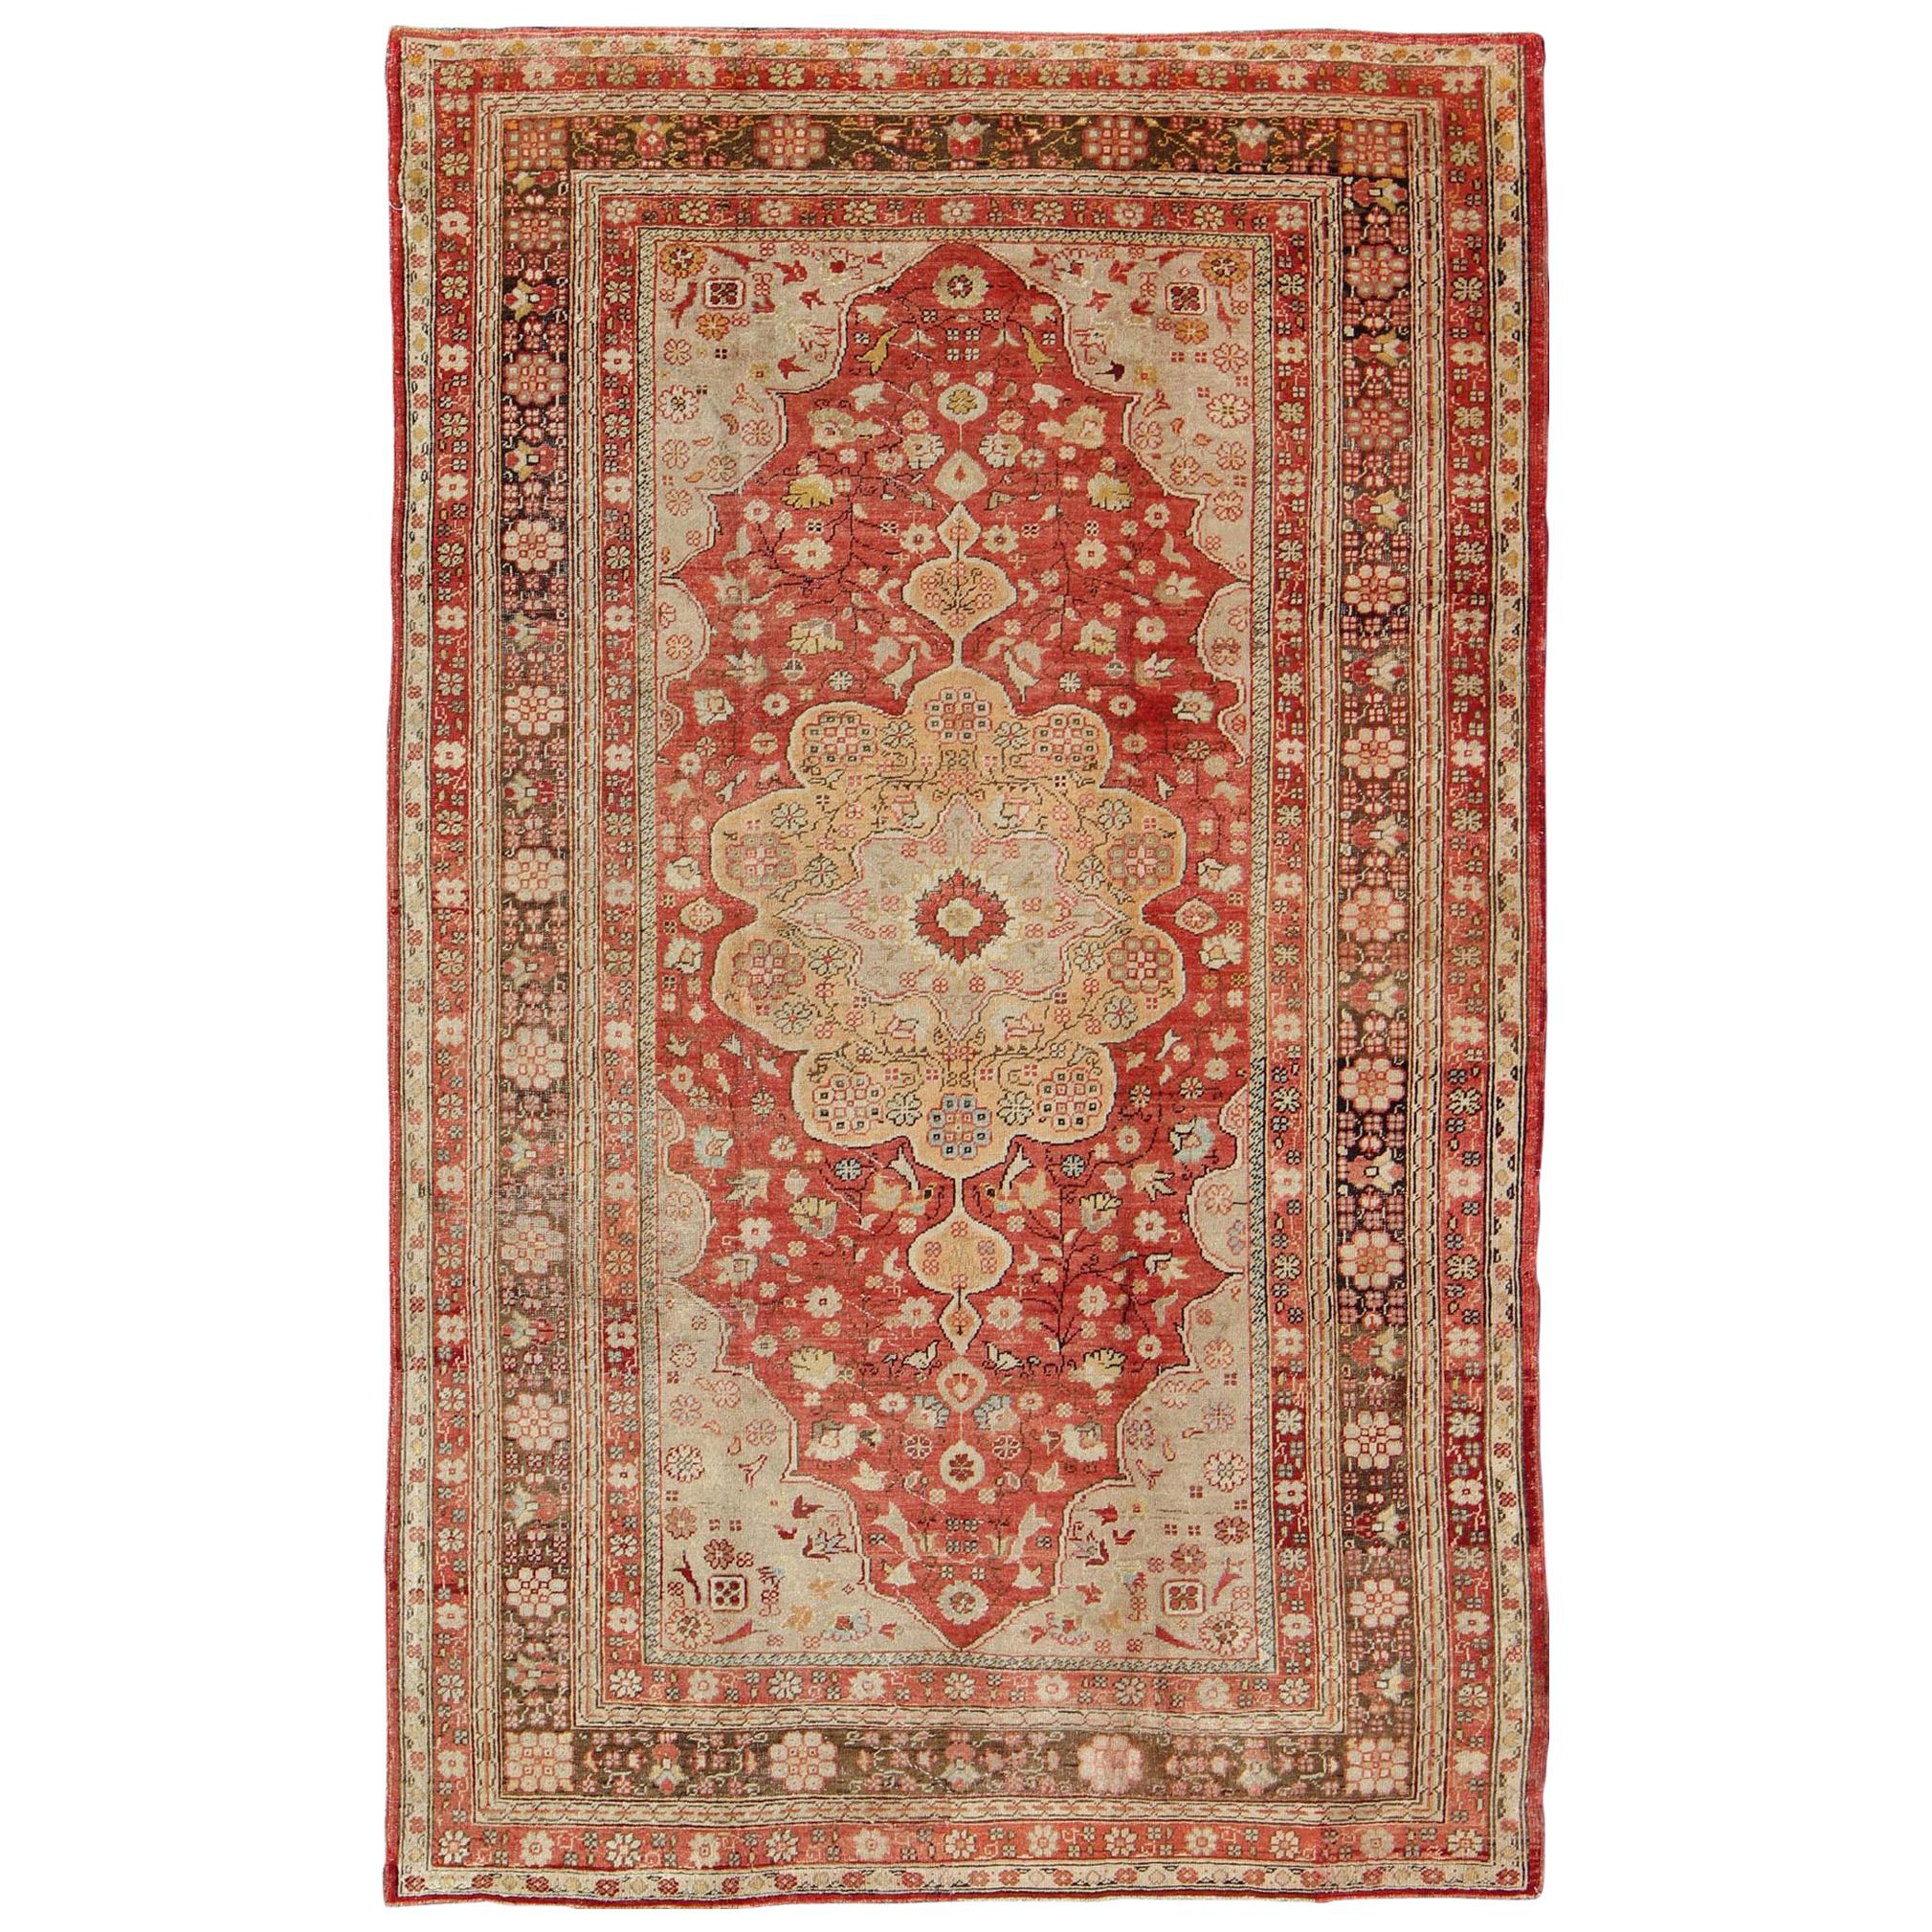 Antique Oushak Rug in Soft Red, Brown and Tan